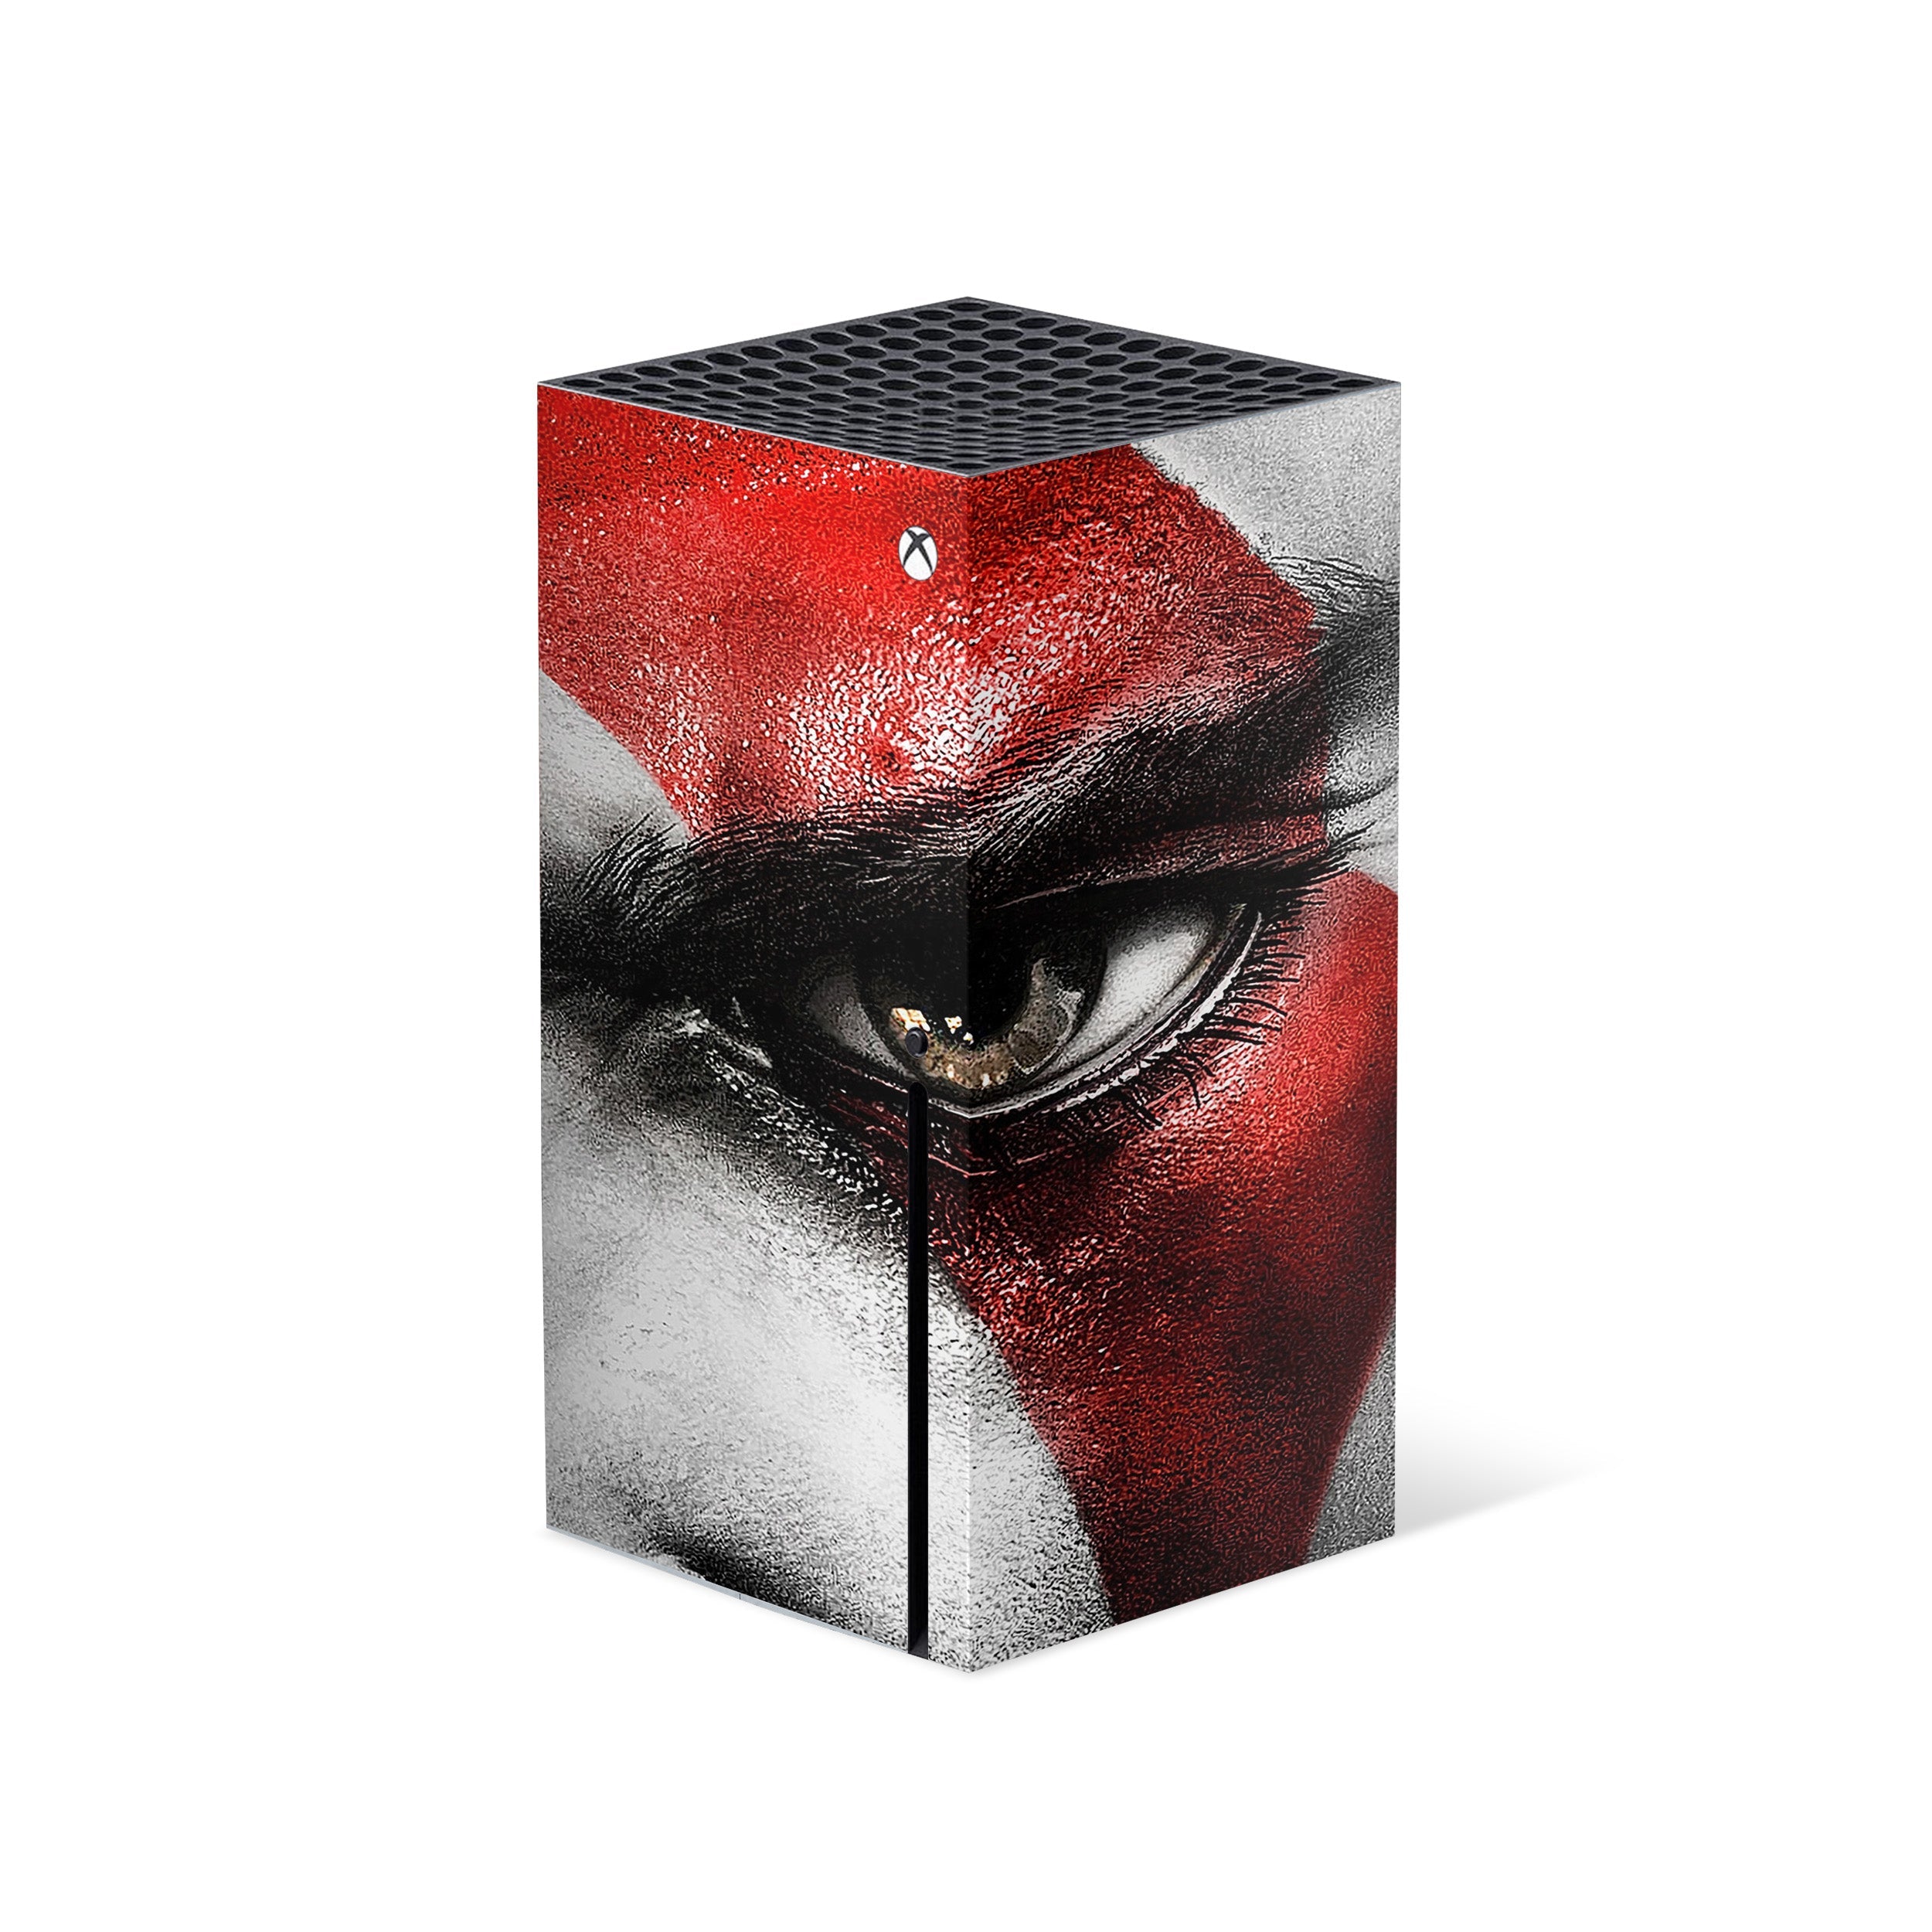 A video game skin featuring a God Of War Kratos design for the Xbox Series X.